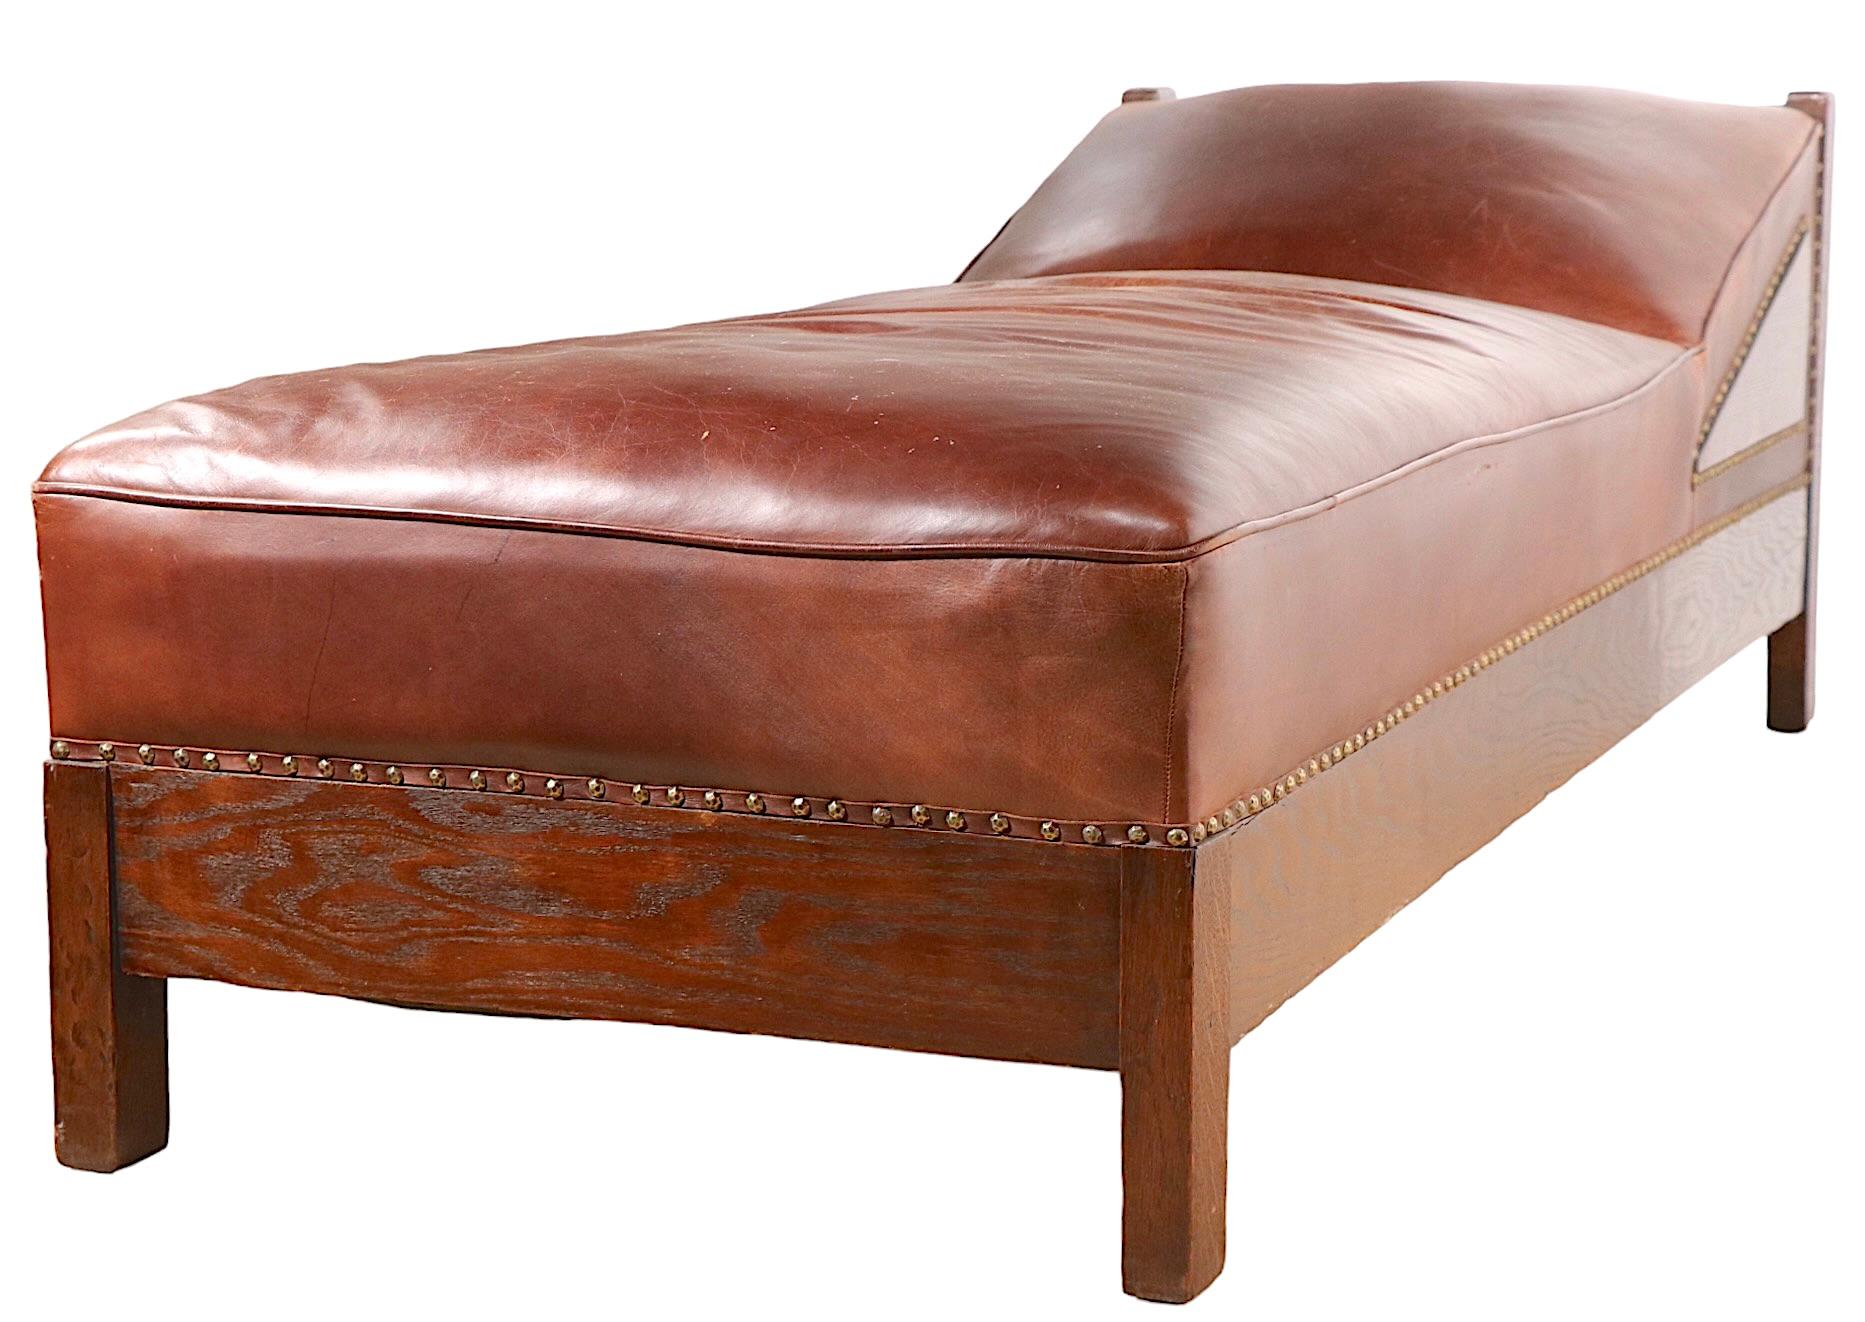 20th Century Oak and Leather Arts and Crafts Mission Daybed Chaise Lounge c. 1900 -1920's